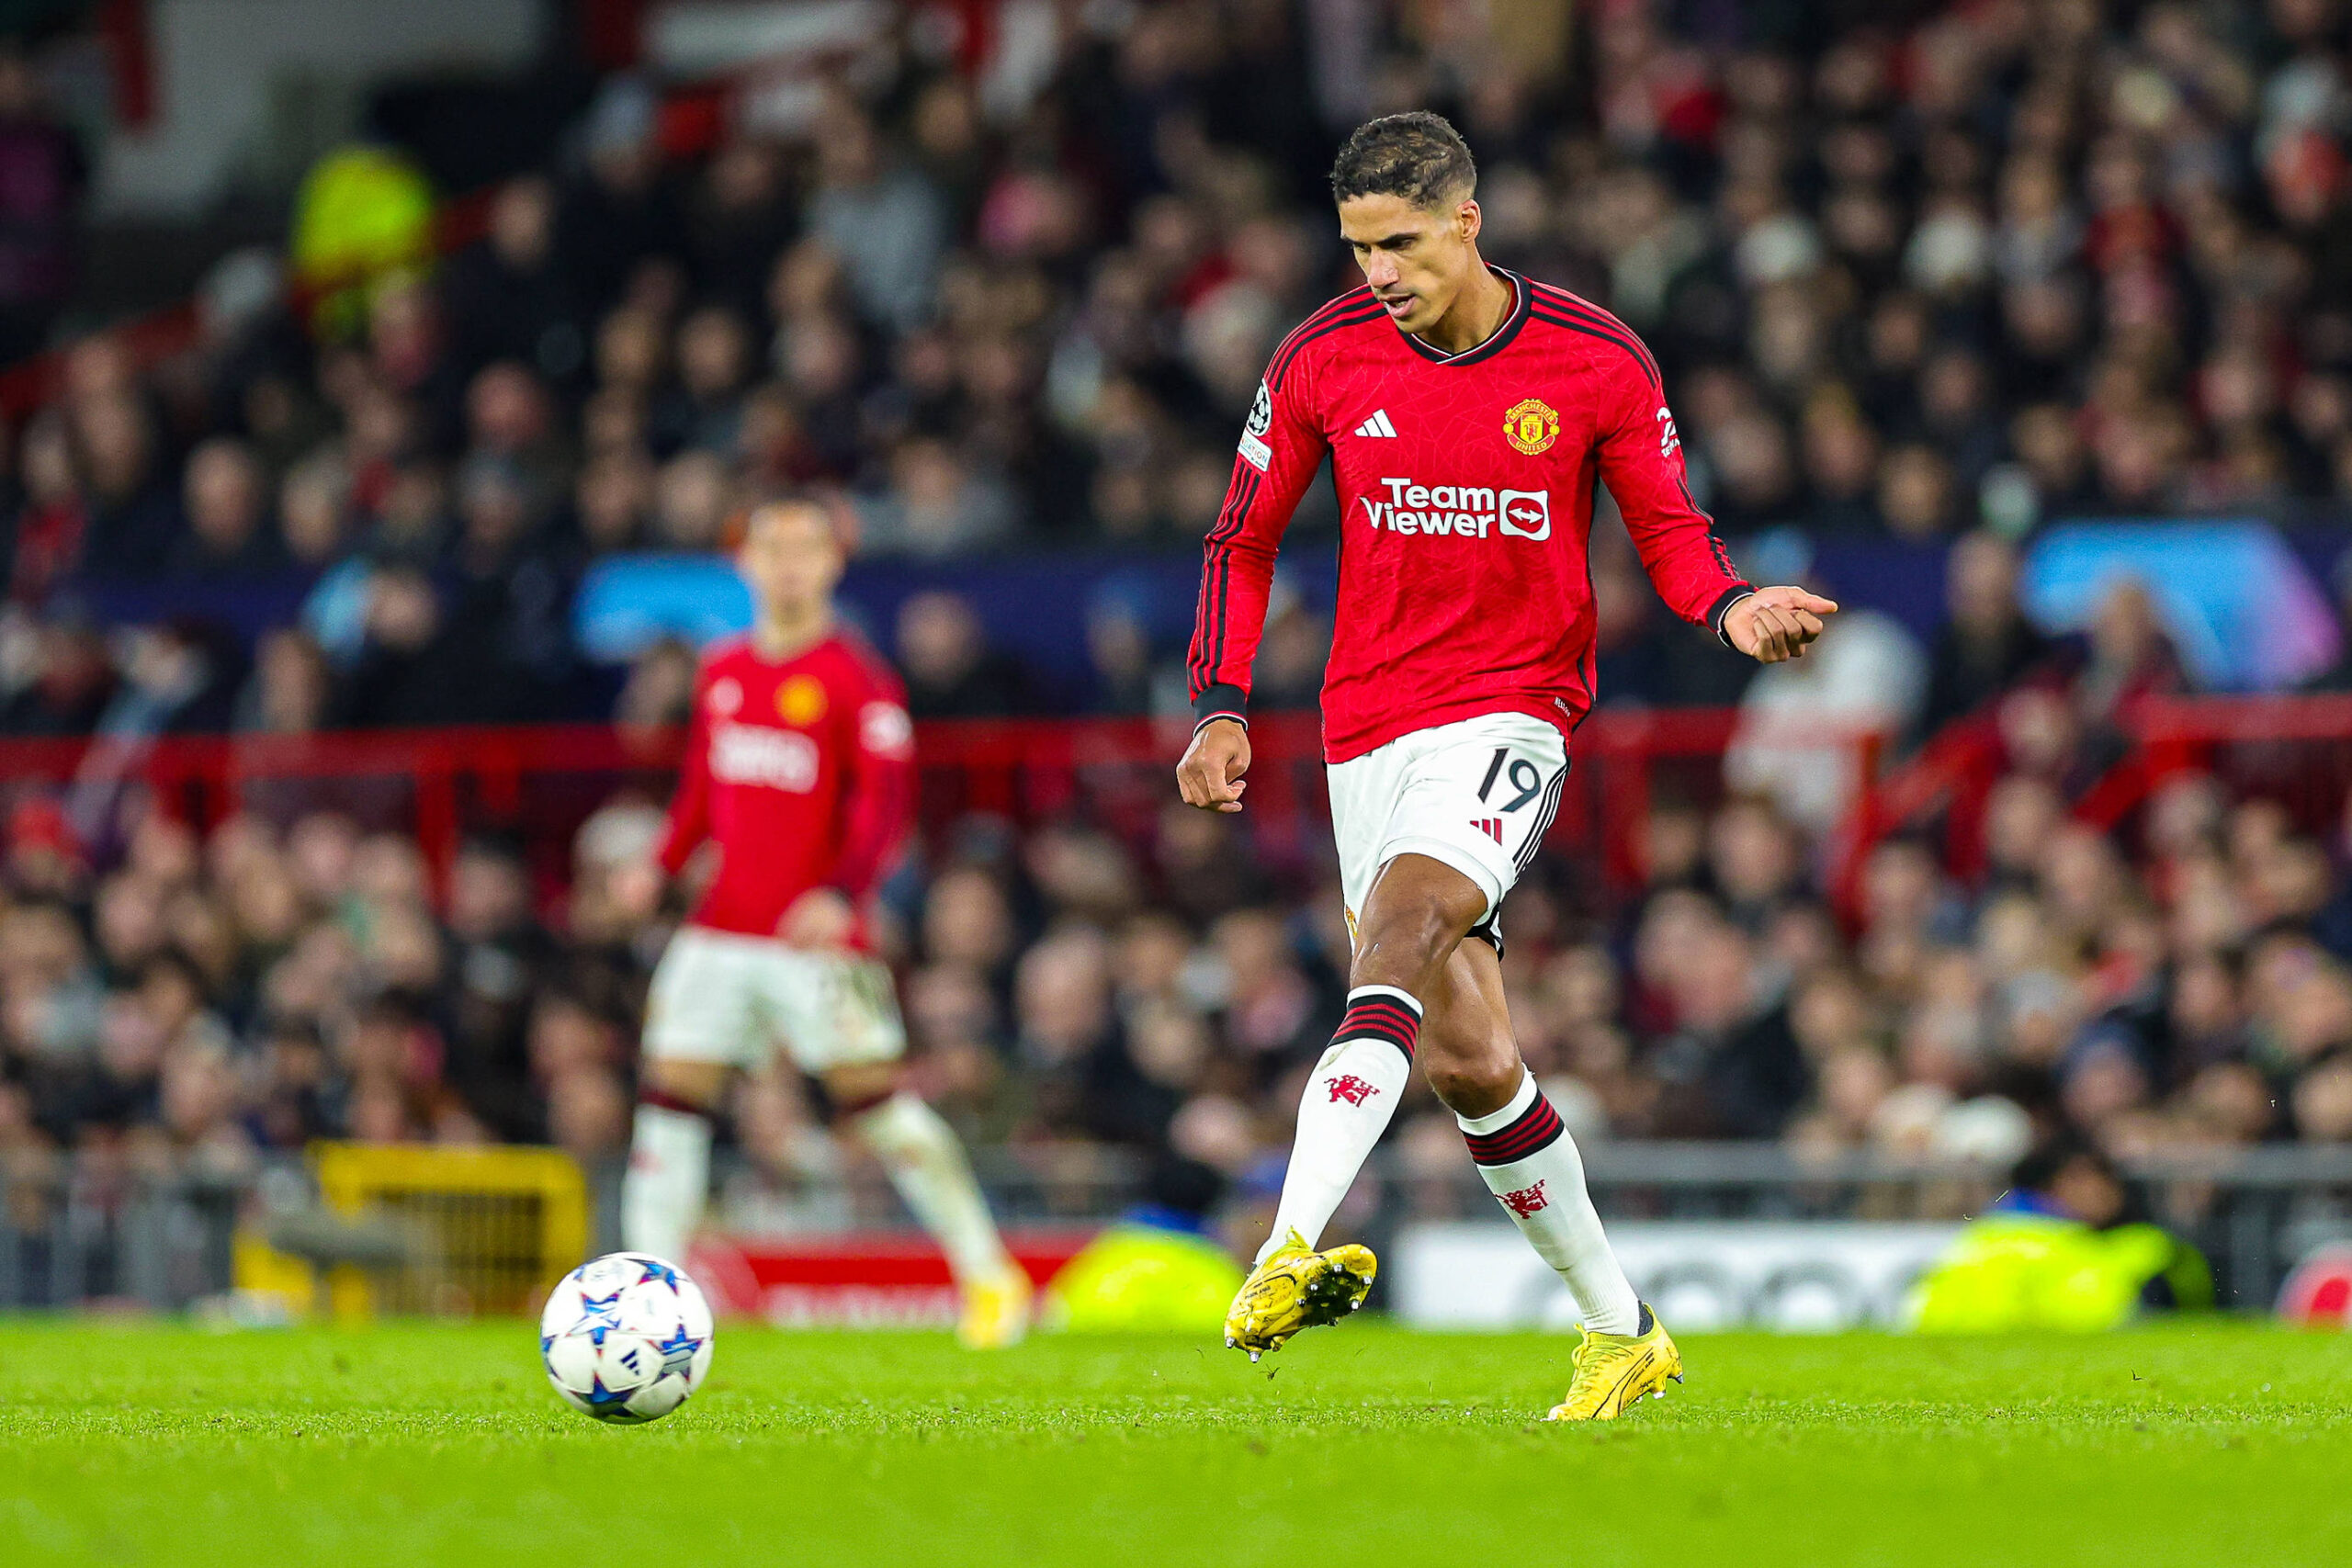 Raphael Varane could leave Manchester United as a free agent after his contract expires next summer.